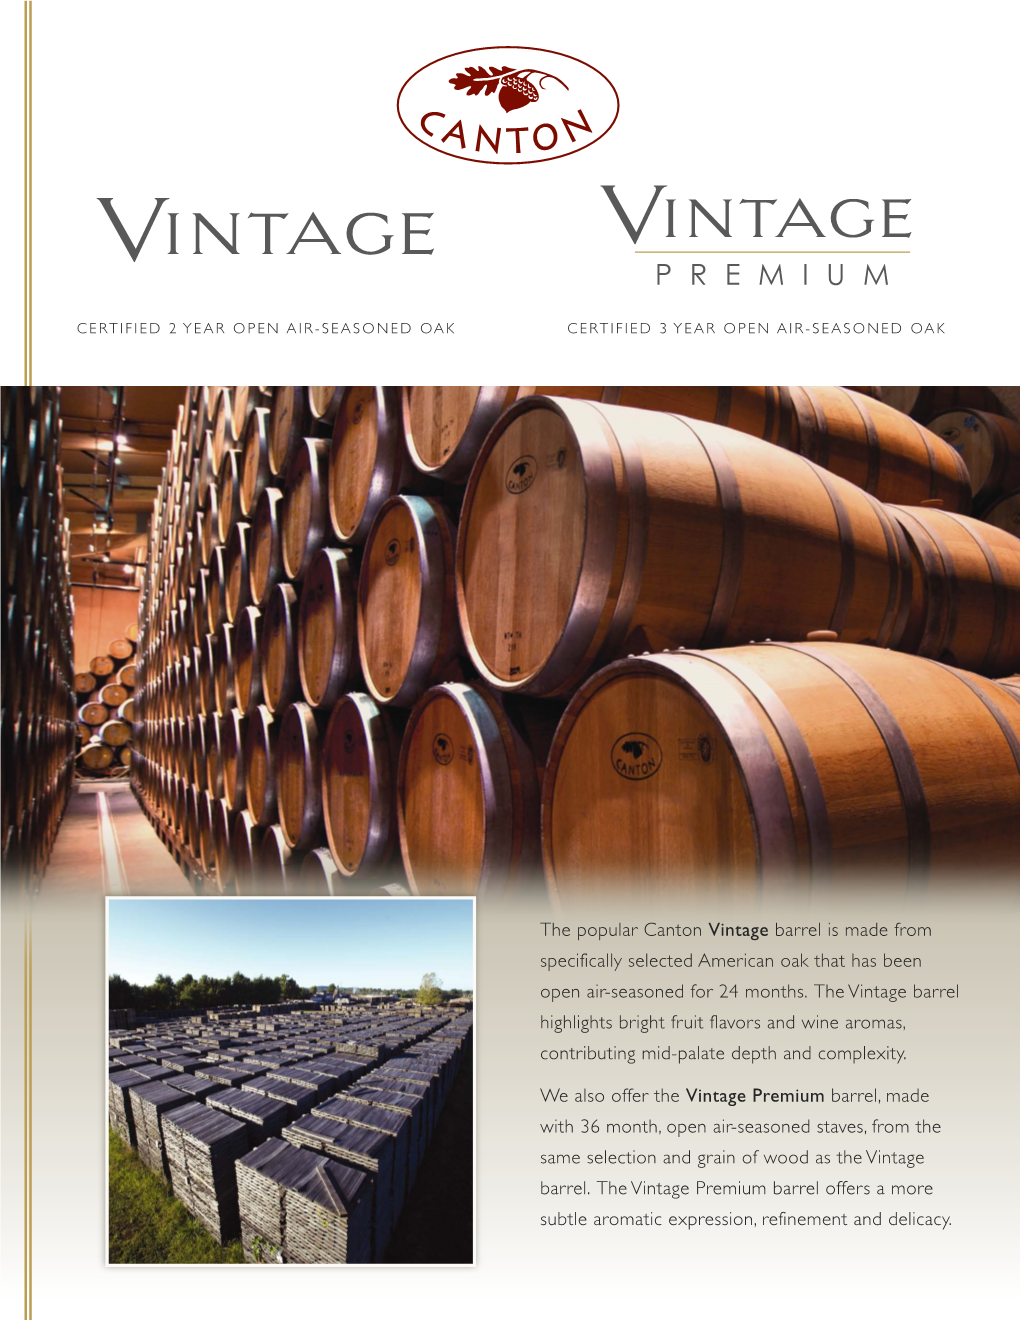 The Popular Canton Vintage Barrel Is Made from Specifically Selected American Oak That Has Been Open Air-Seasoned for 24 Months